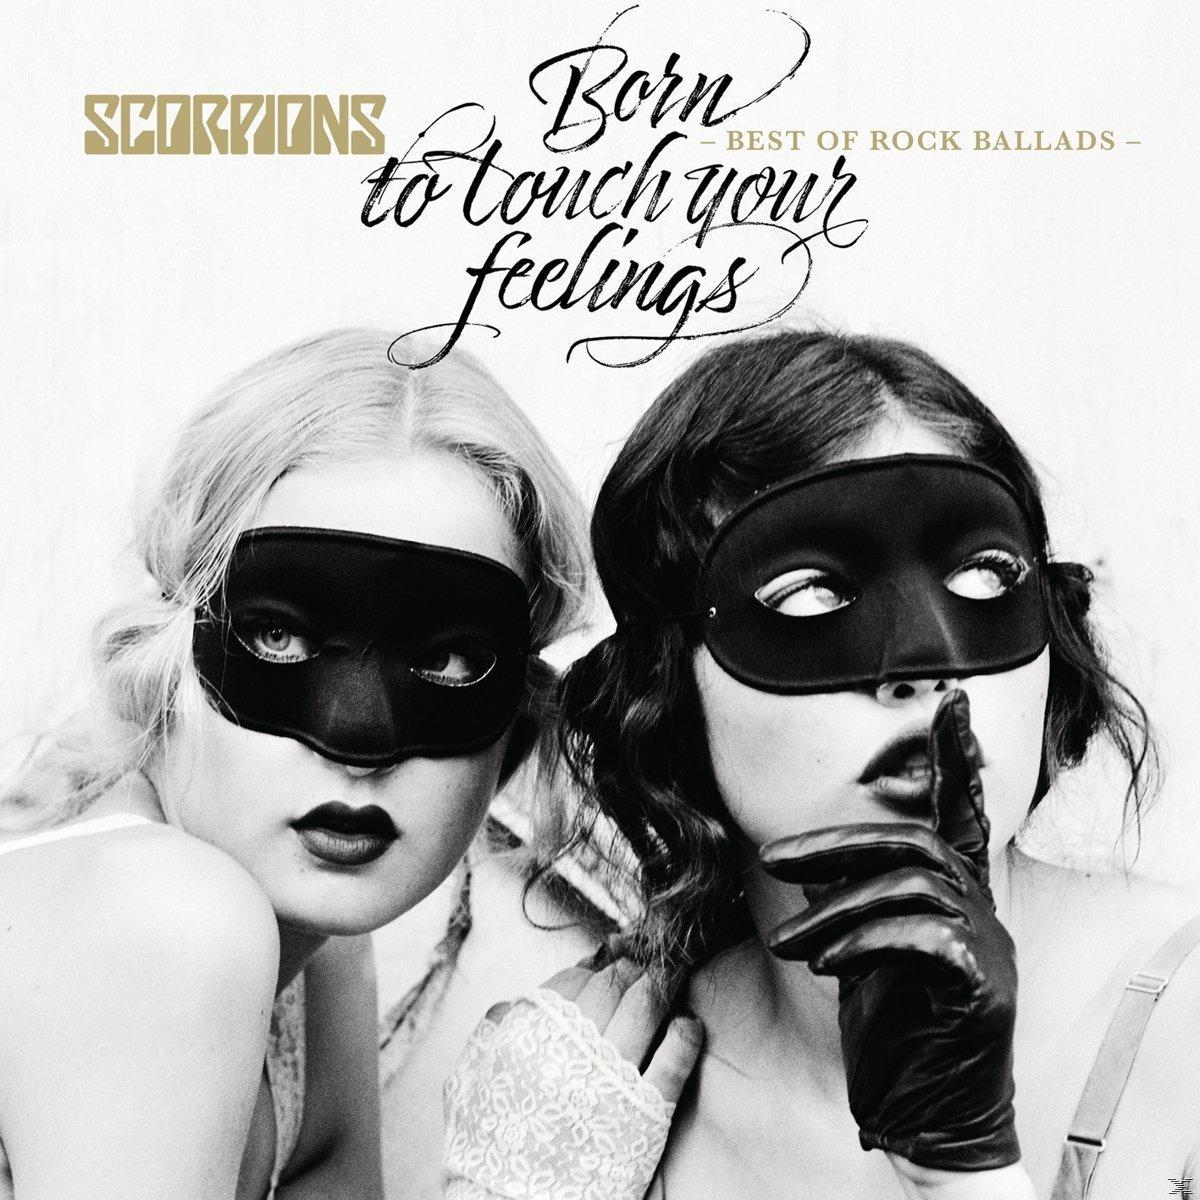 Scorpions - Born To Touch Your Feelings-Best (CD) of - Ballads Rock